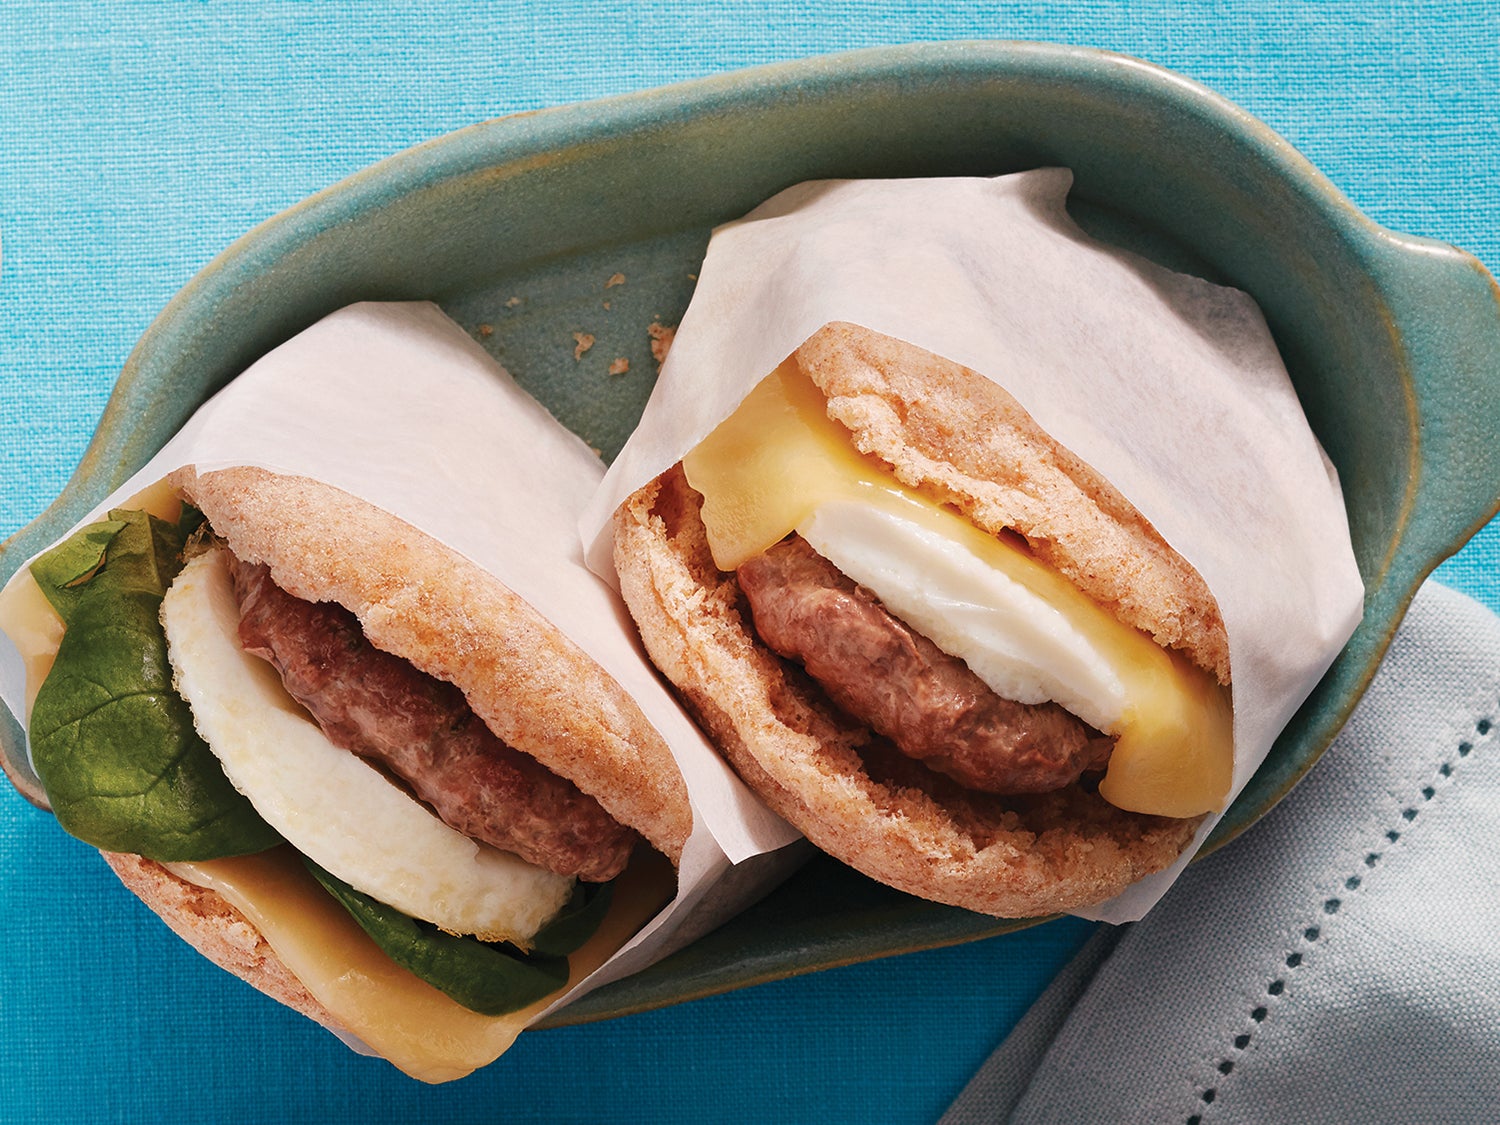 Sausage, Egg and Cheese Sandwich